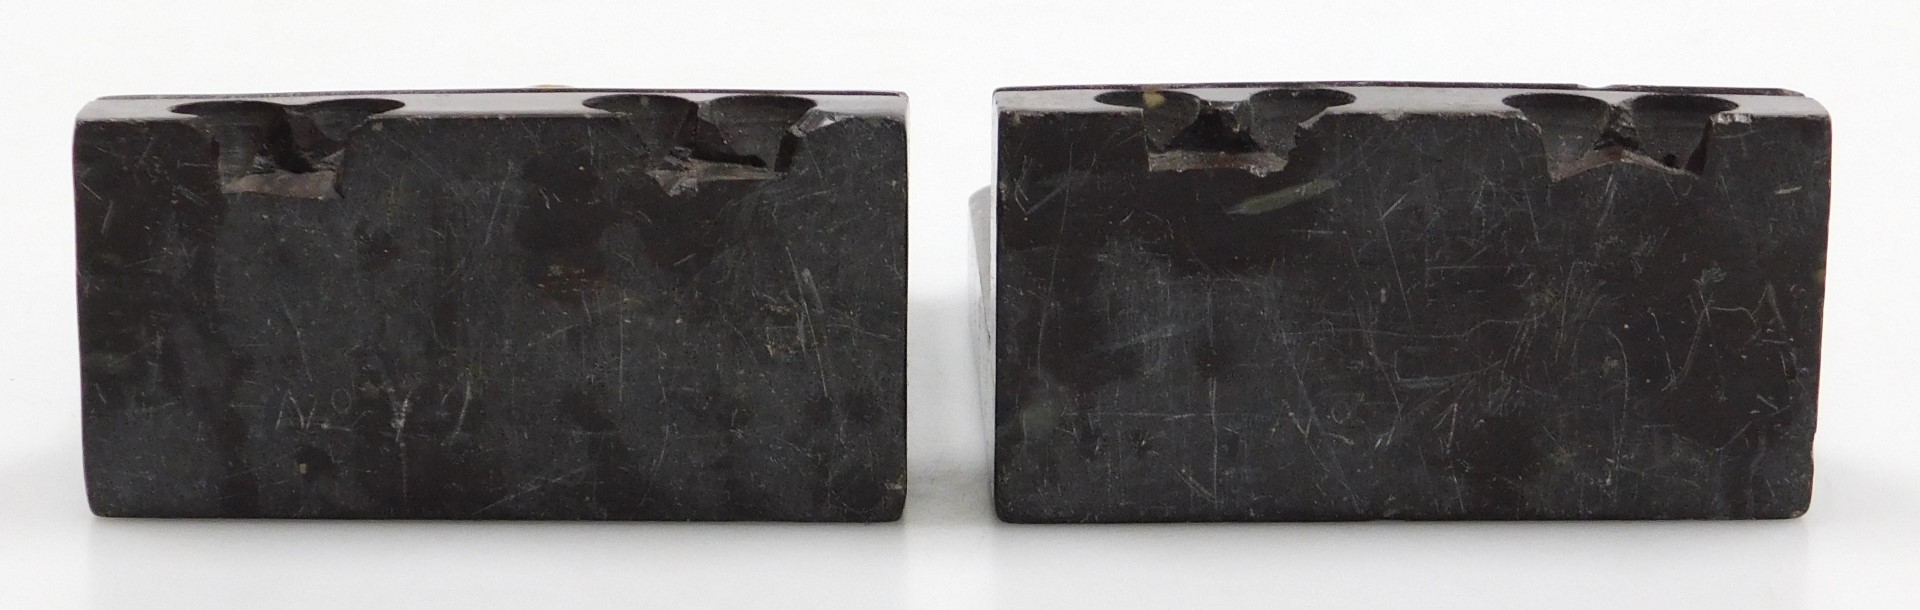 A pair of late 19thC Qing dynasty soapstone bookends, carved with immortals on a cloud ground, and c - Image 6 of 6